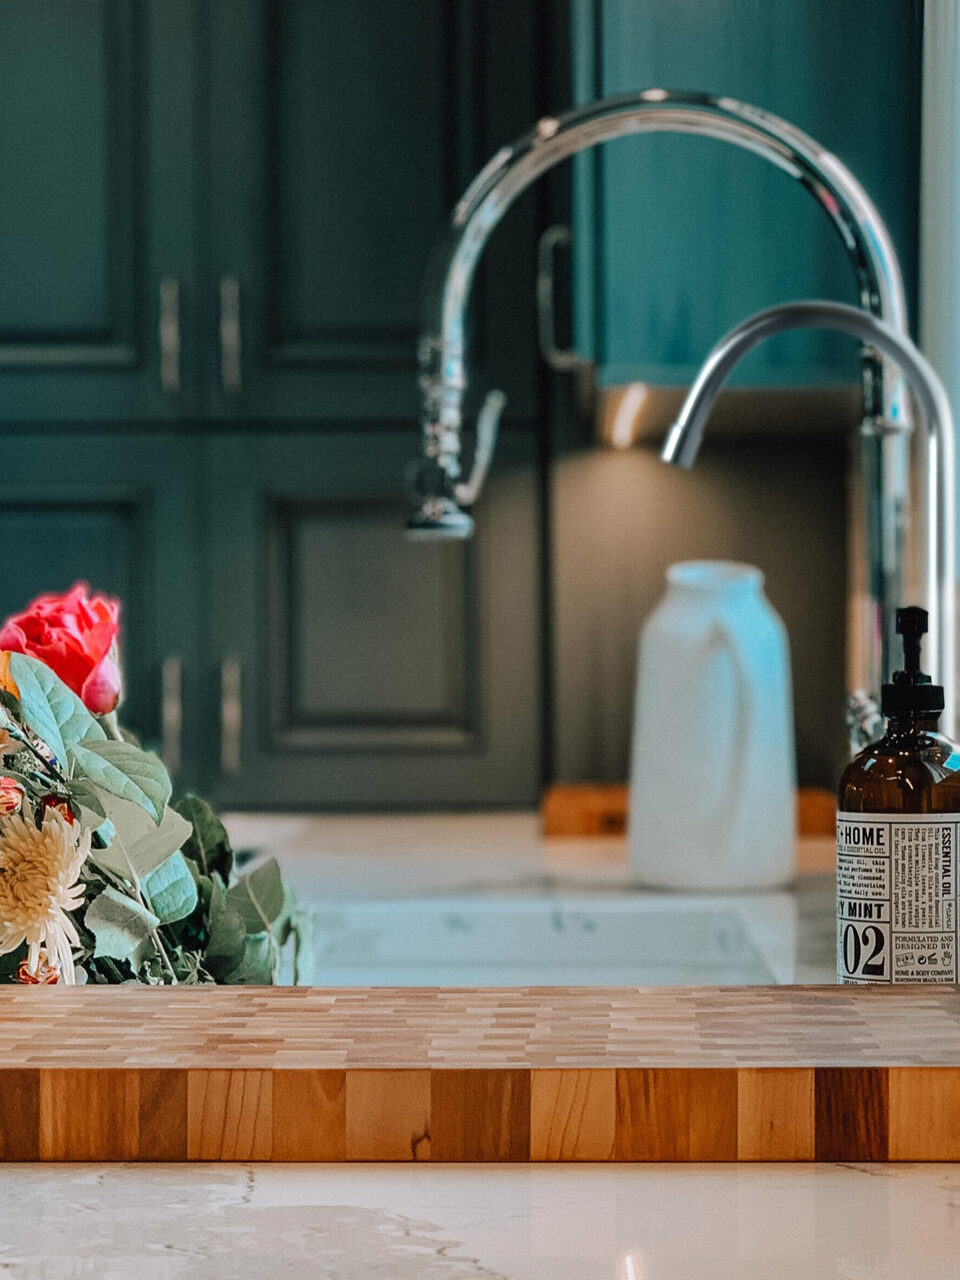 A kitchen sink and spout with a cutting board in front of it and flowers to the left of the spout.